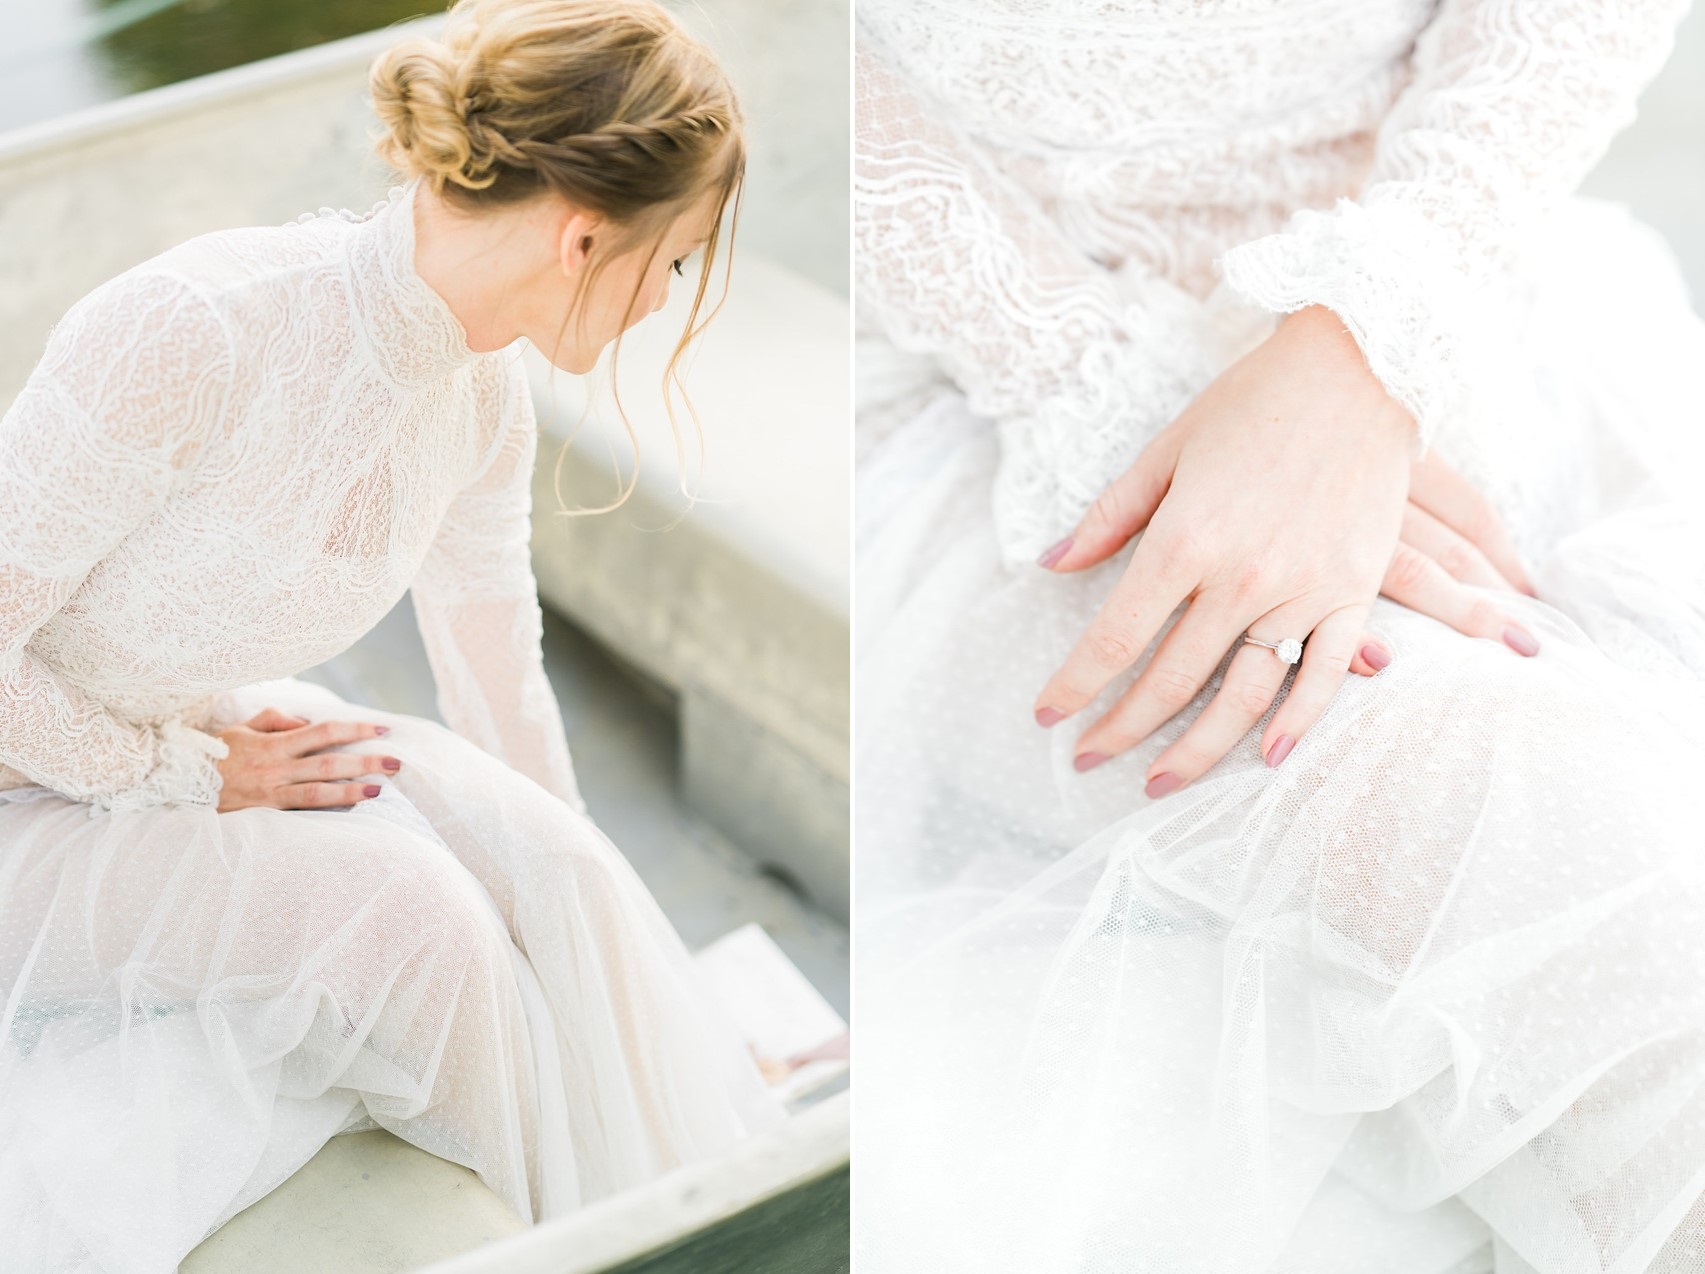 Long Lace Sleeved Wedding Dress & Engagement Ring